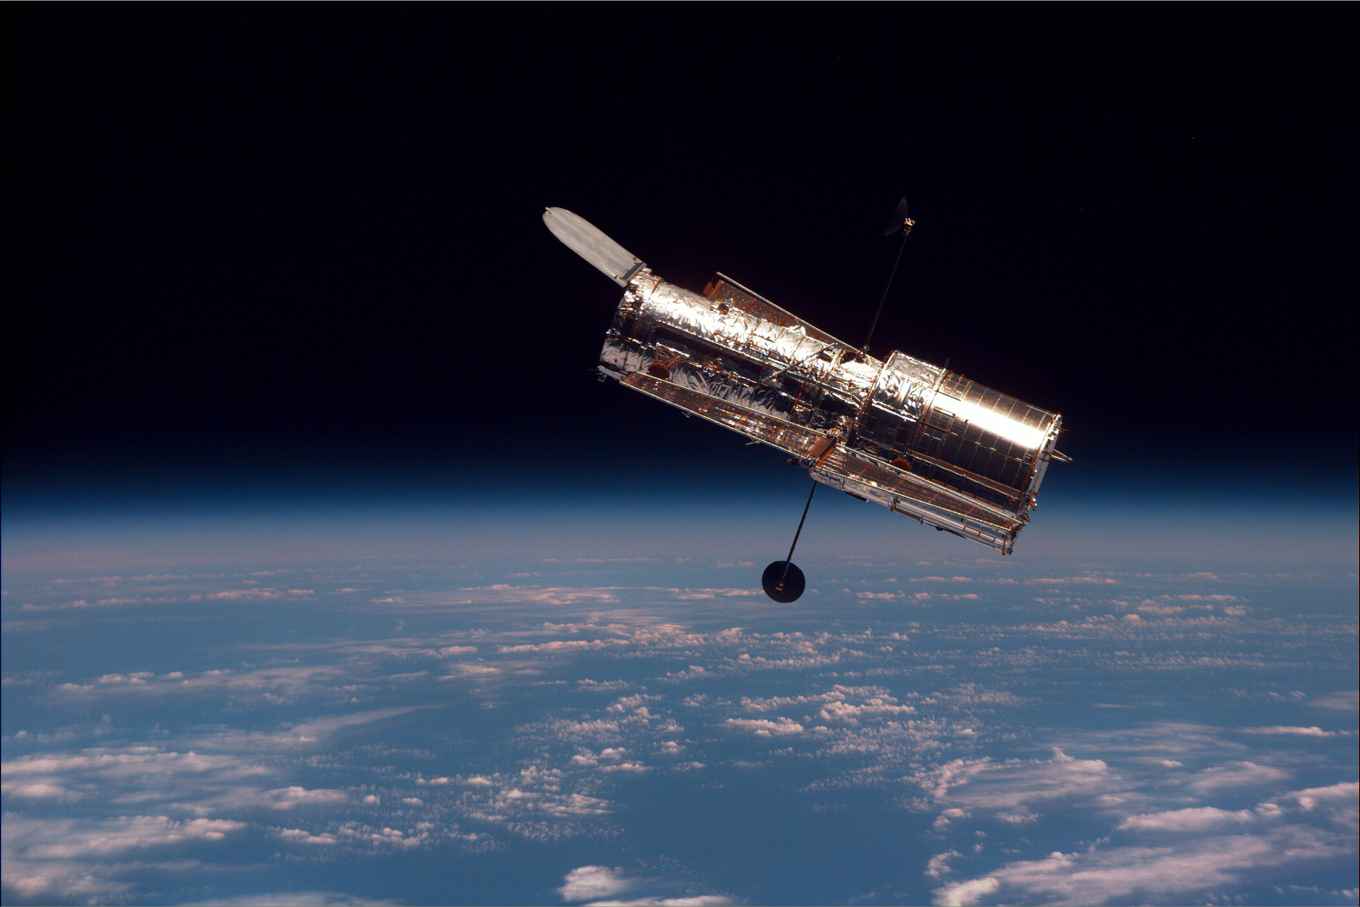 The Hubble Space Telescope, as seen from Space Shuttle Discovery. Image: NASA